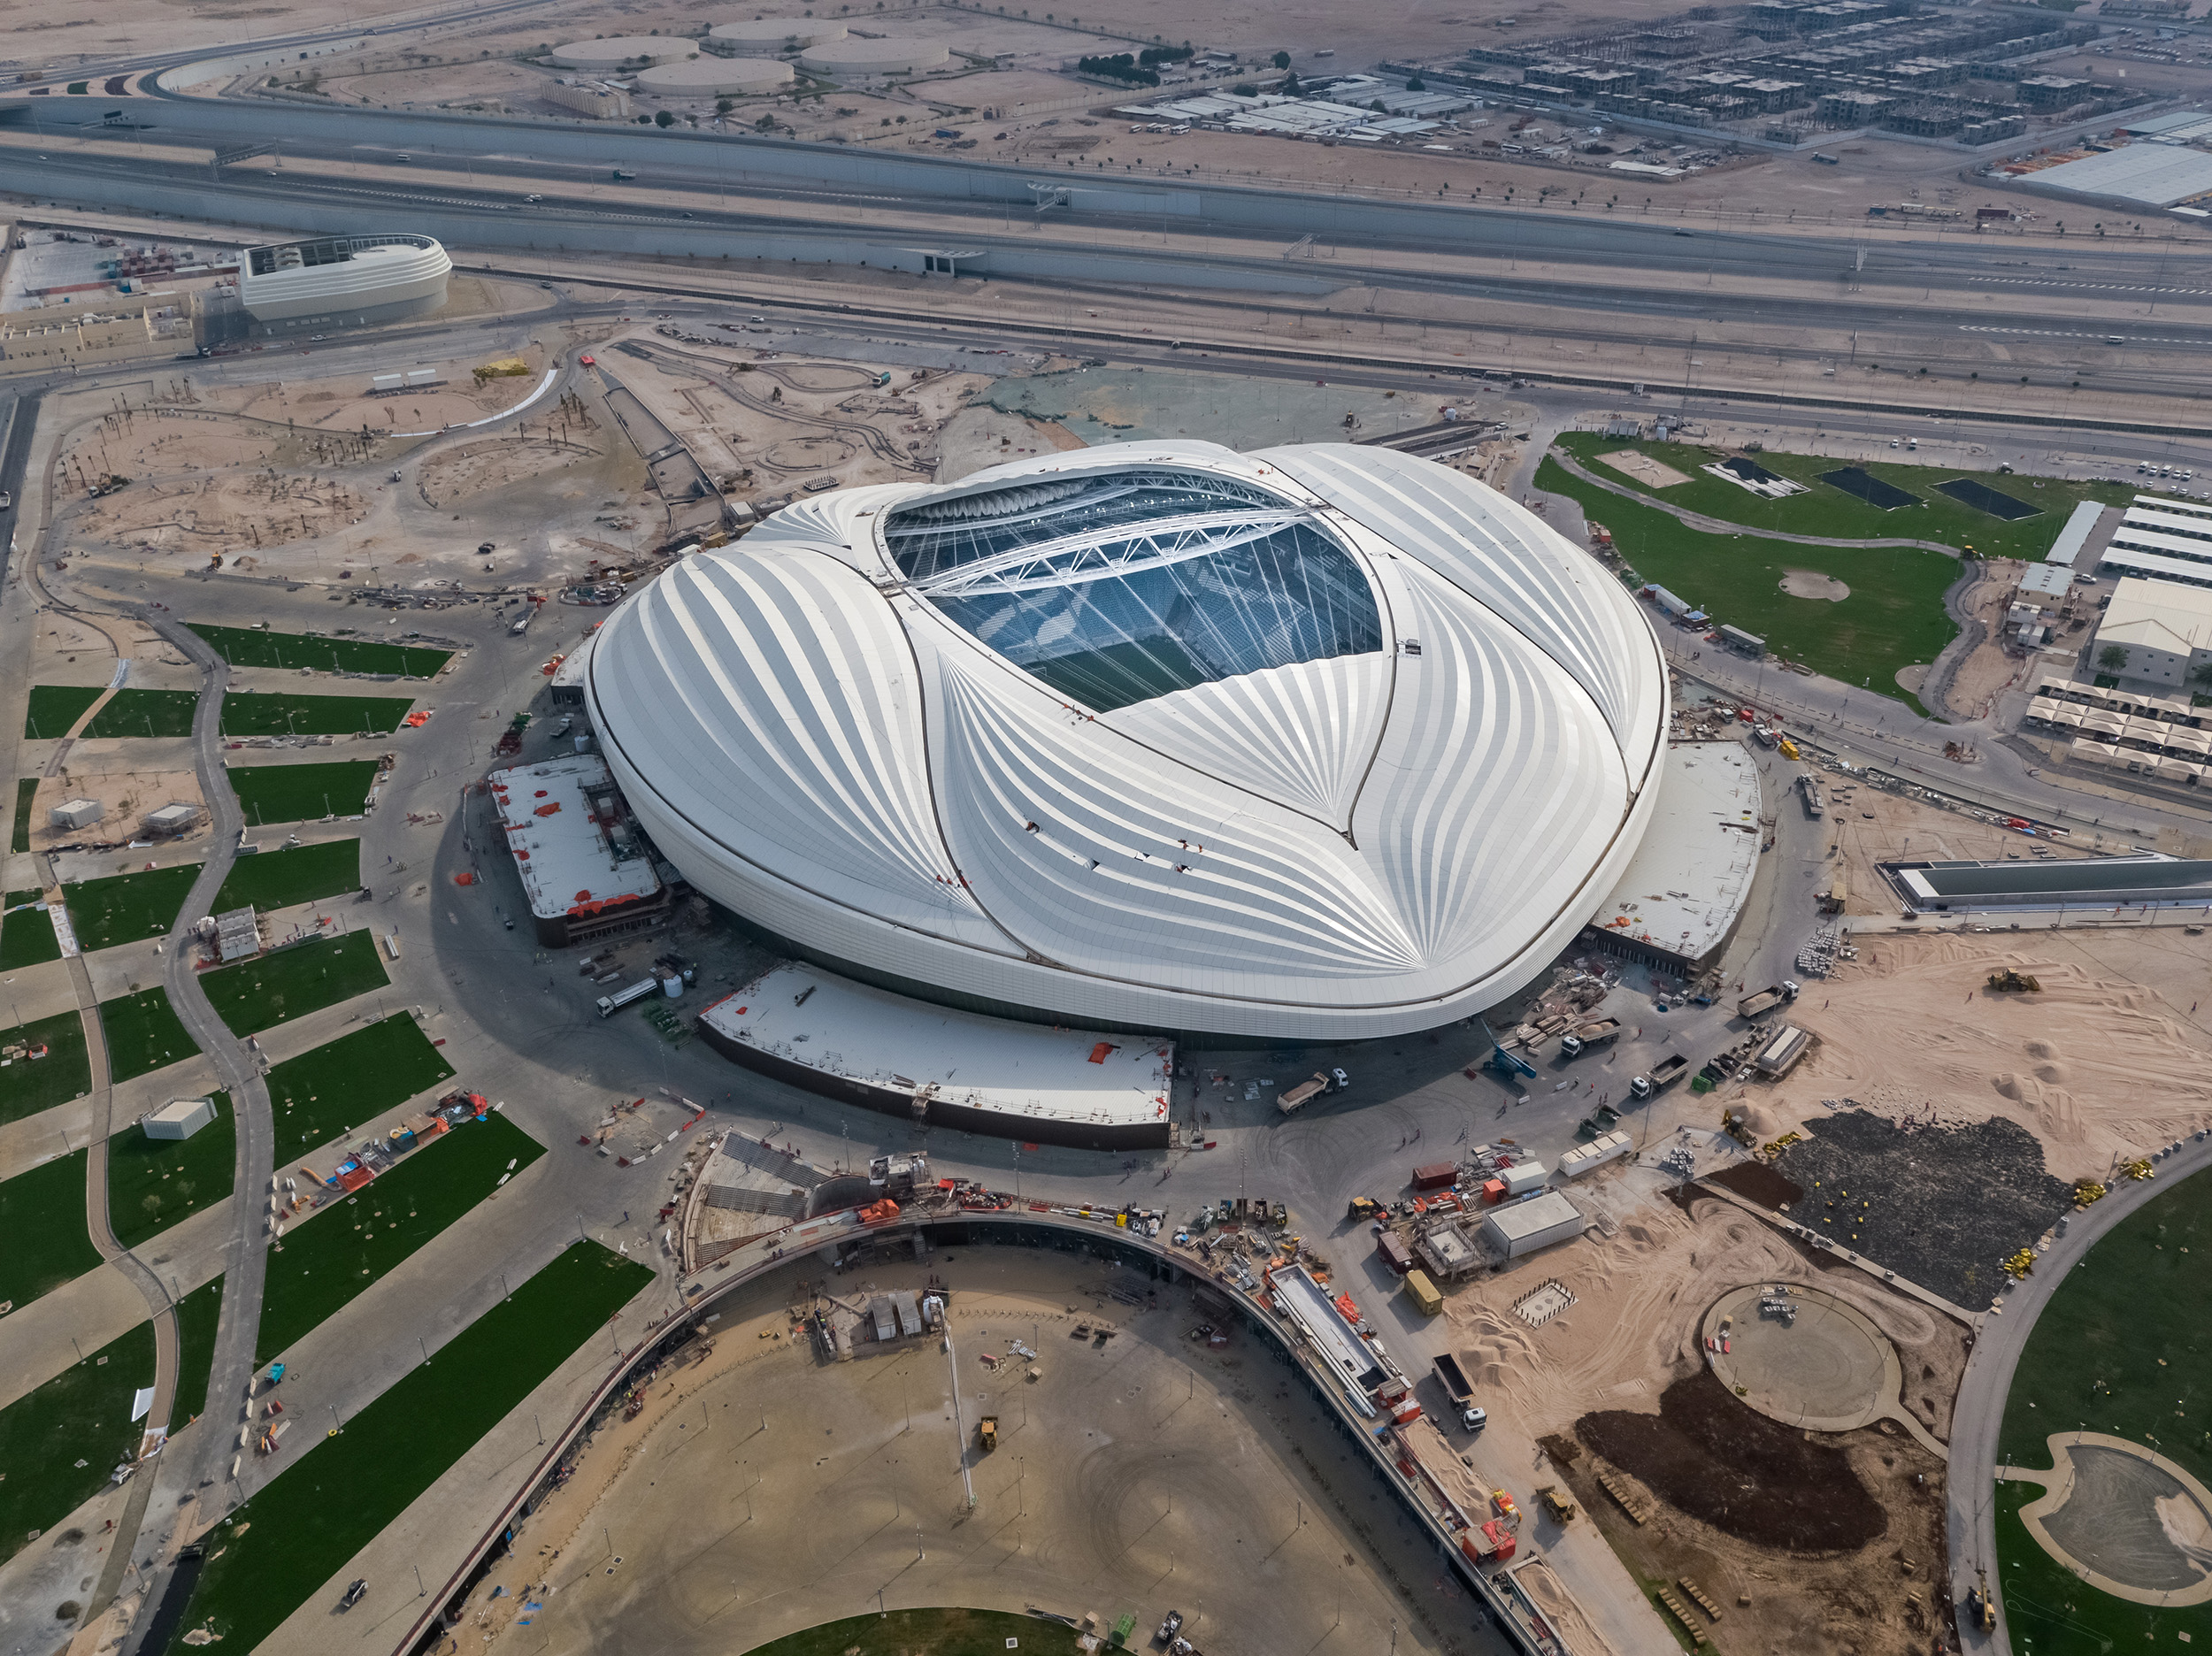 A view of the Al Wakrah stadium from outside [Supreme Committee for Delivery & Legacy]